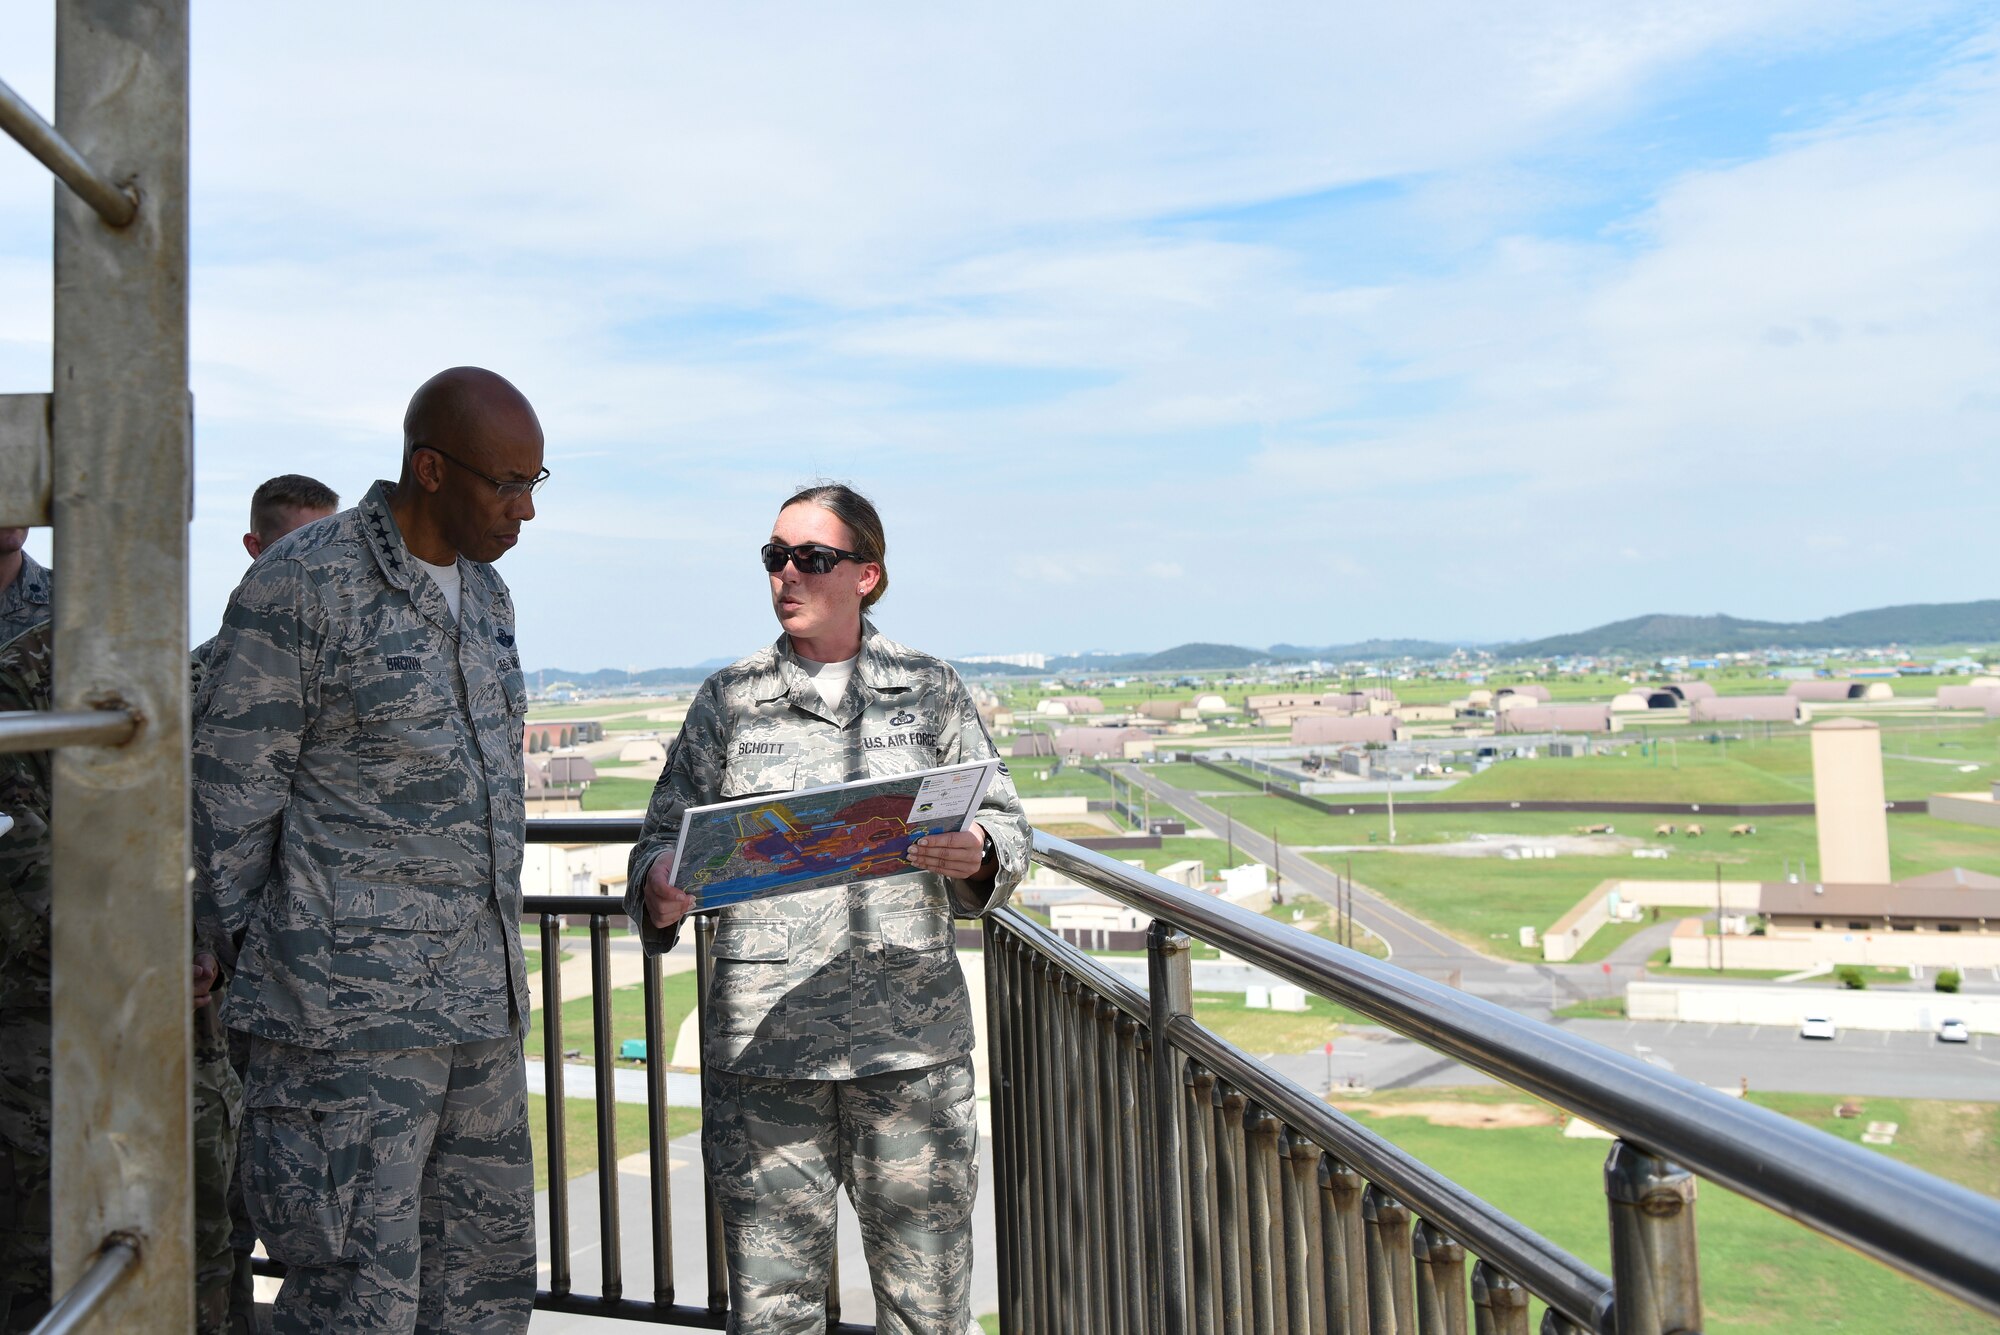 U.S. Air Force Gen. CQ Brown, Jr., Pacific Air Forces commander (left), is briefed atop the air traffic control tower during his immersion tour by Senior Master Sgt. Kristin Schott (right), 8th Operations Support Squadron airfield manager, at Kunsan Air Base, Republic of Korea, Aug. 29, 2018. Airmen from the 8th Fighter Wing briefed Brown on current airfield construction, hazardous material construction, and Department of Defense explosives safety board responsibilities and procedures, while overlooking the installation from the air traffic control tower. (U.S. Air Force photo by Senior Airman Savannah L. Waters)